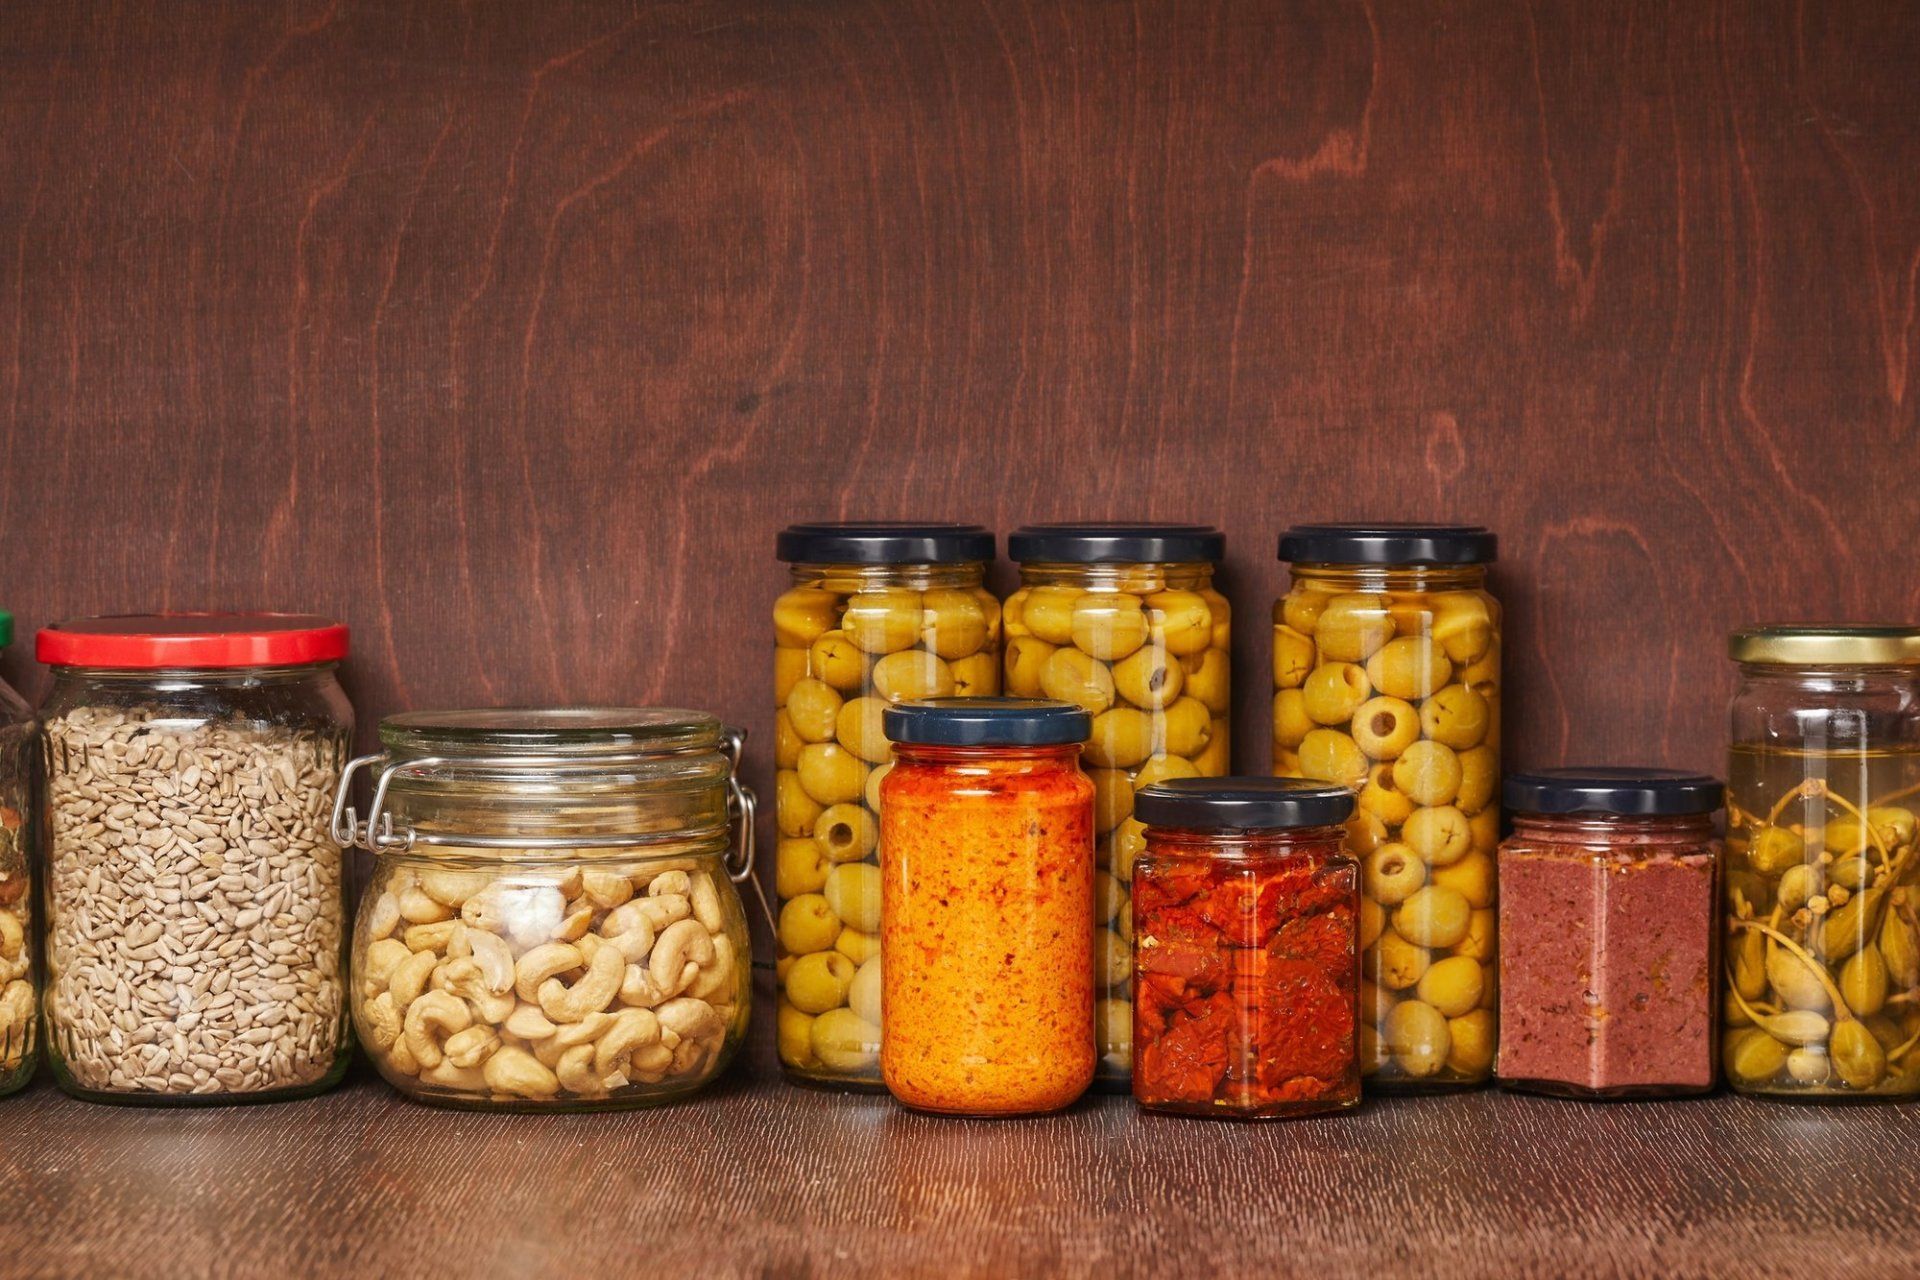 pantry shelf with jars of various foods including olives, cashews and seeds